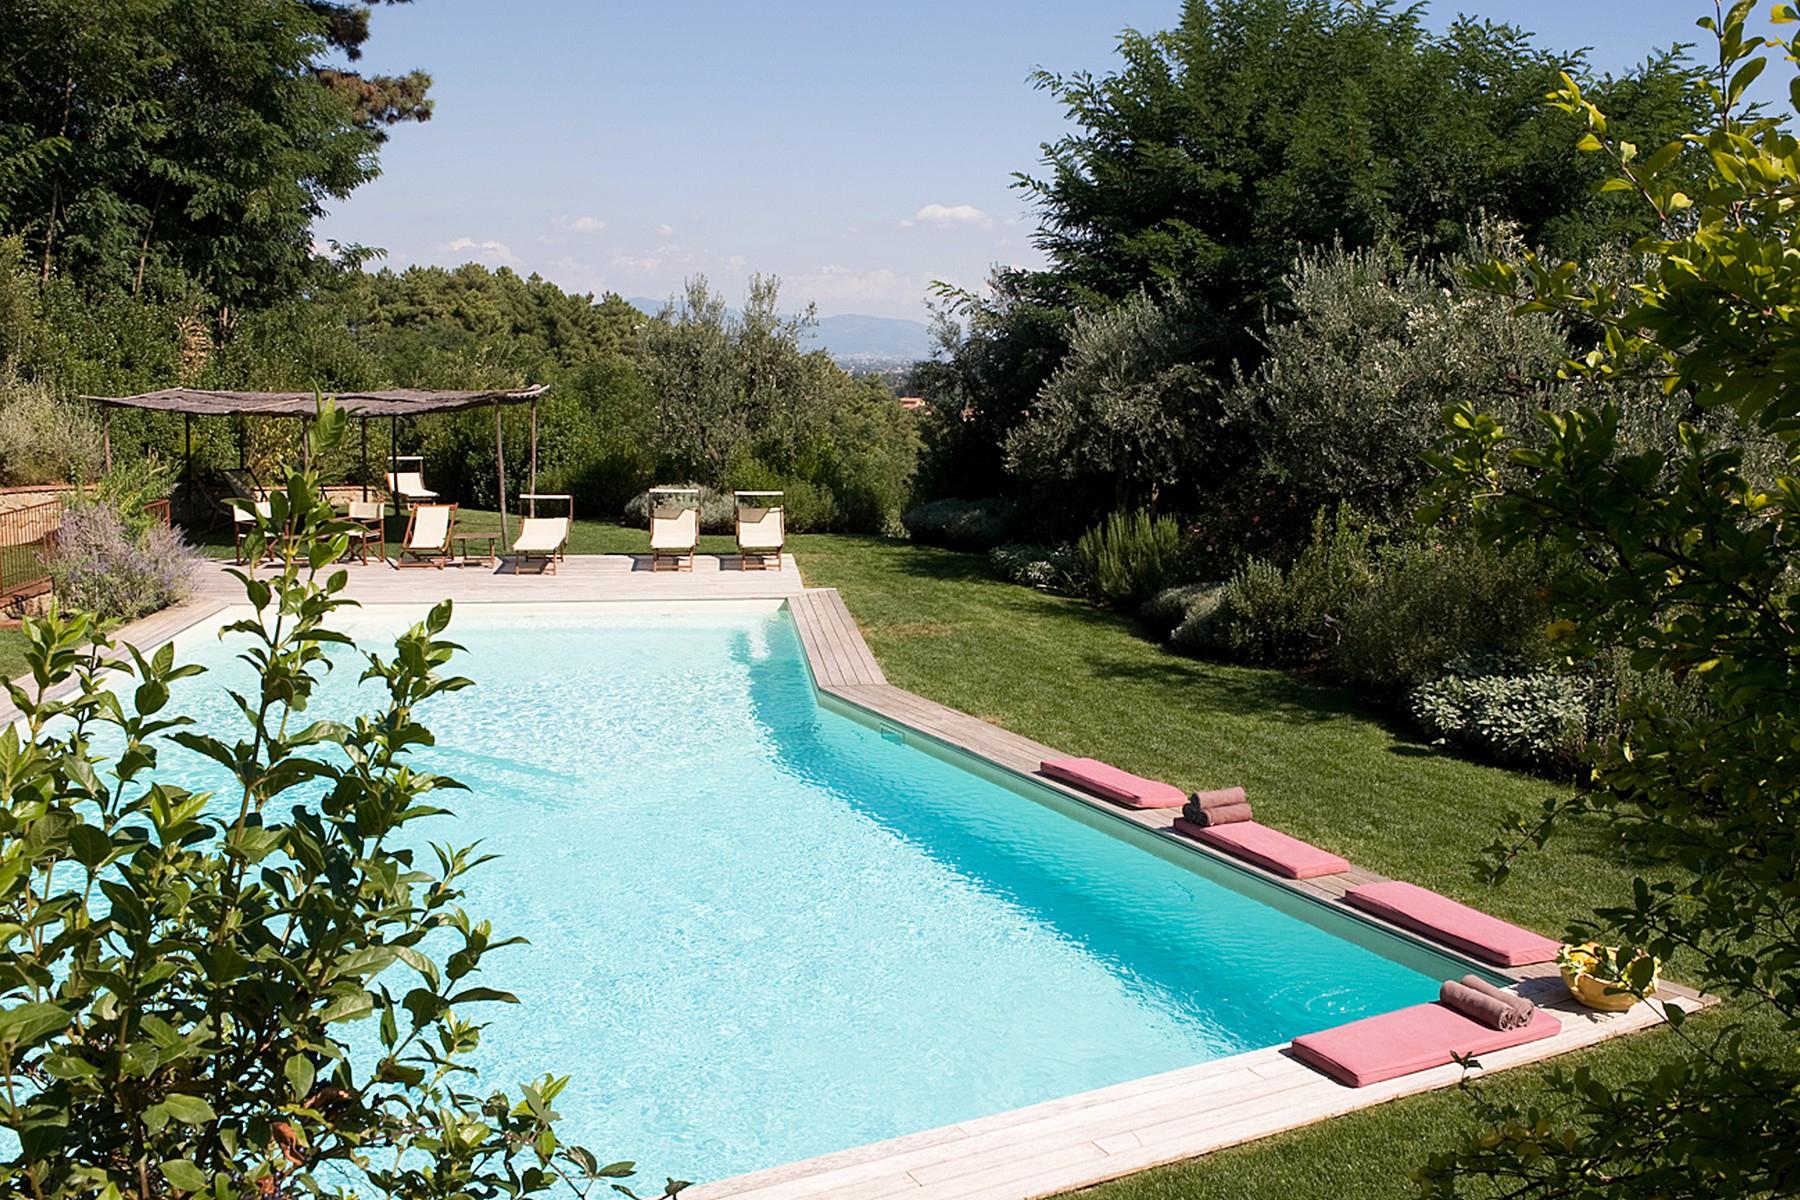 Farmhouse for sale in the Tuscan hills - 18